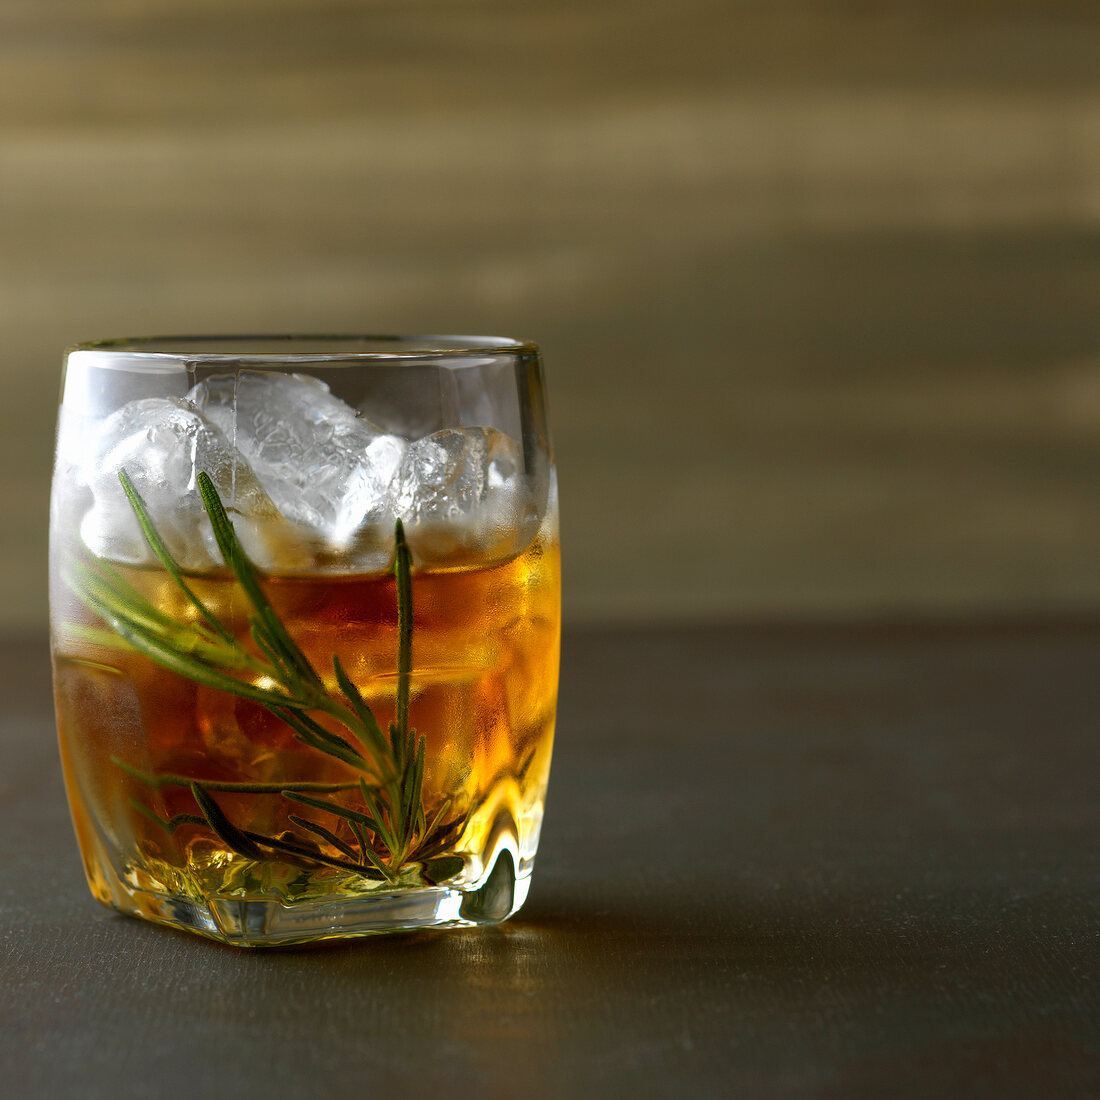 Rosemary with whiskey, rosemary and ice in glass